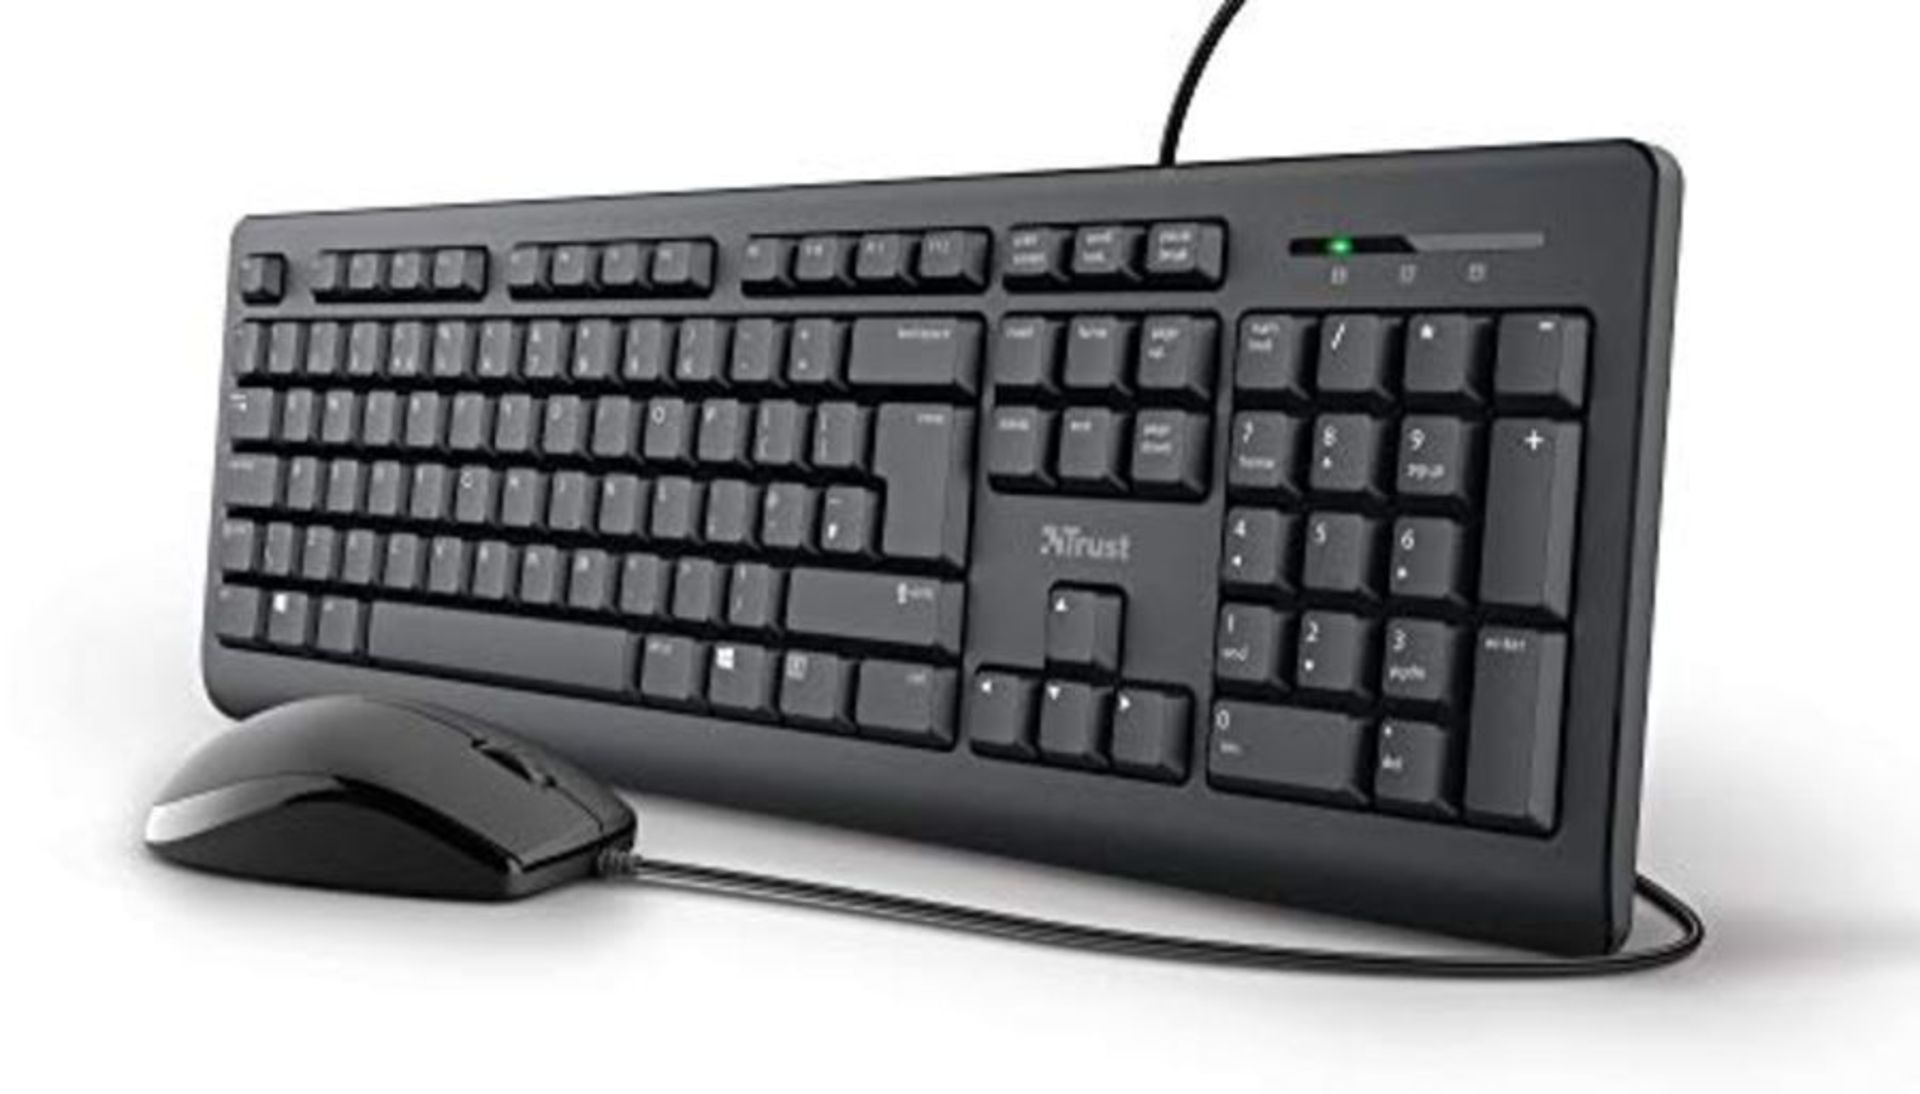 Trust Taro Wired Keyboard and Mouse Set - Qwerty UK Layout, Full-Size Keyboard, Spill-